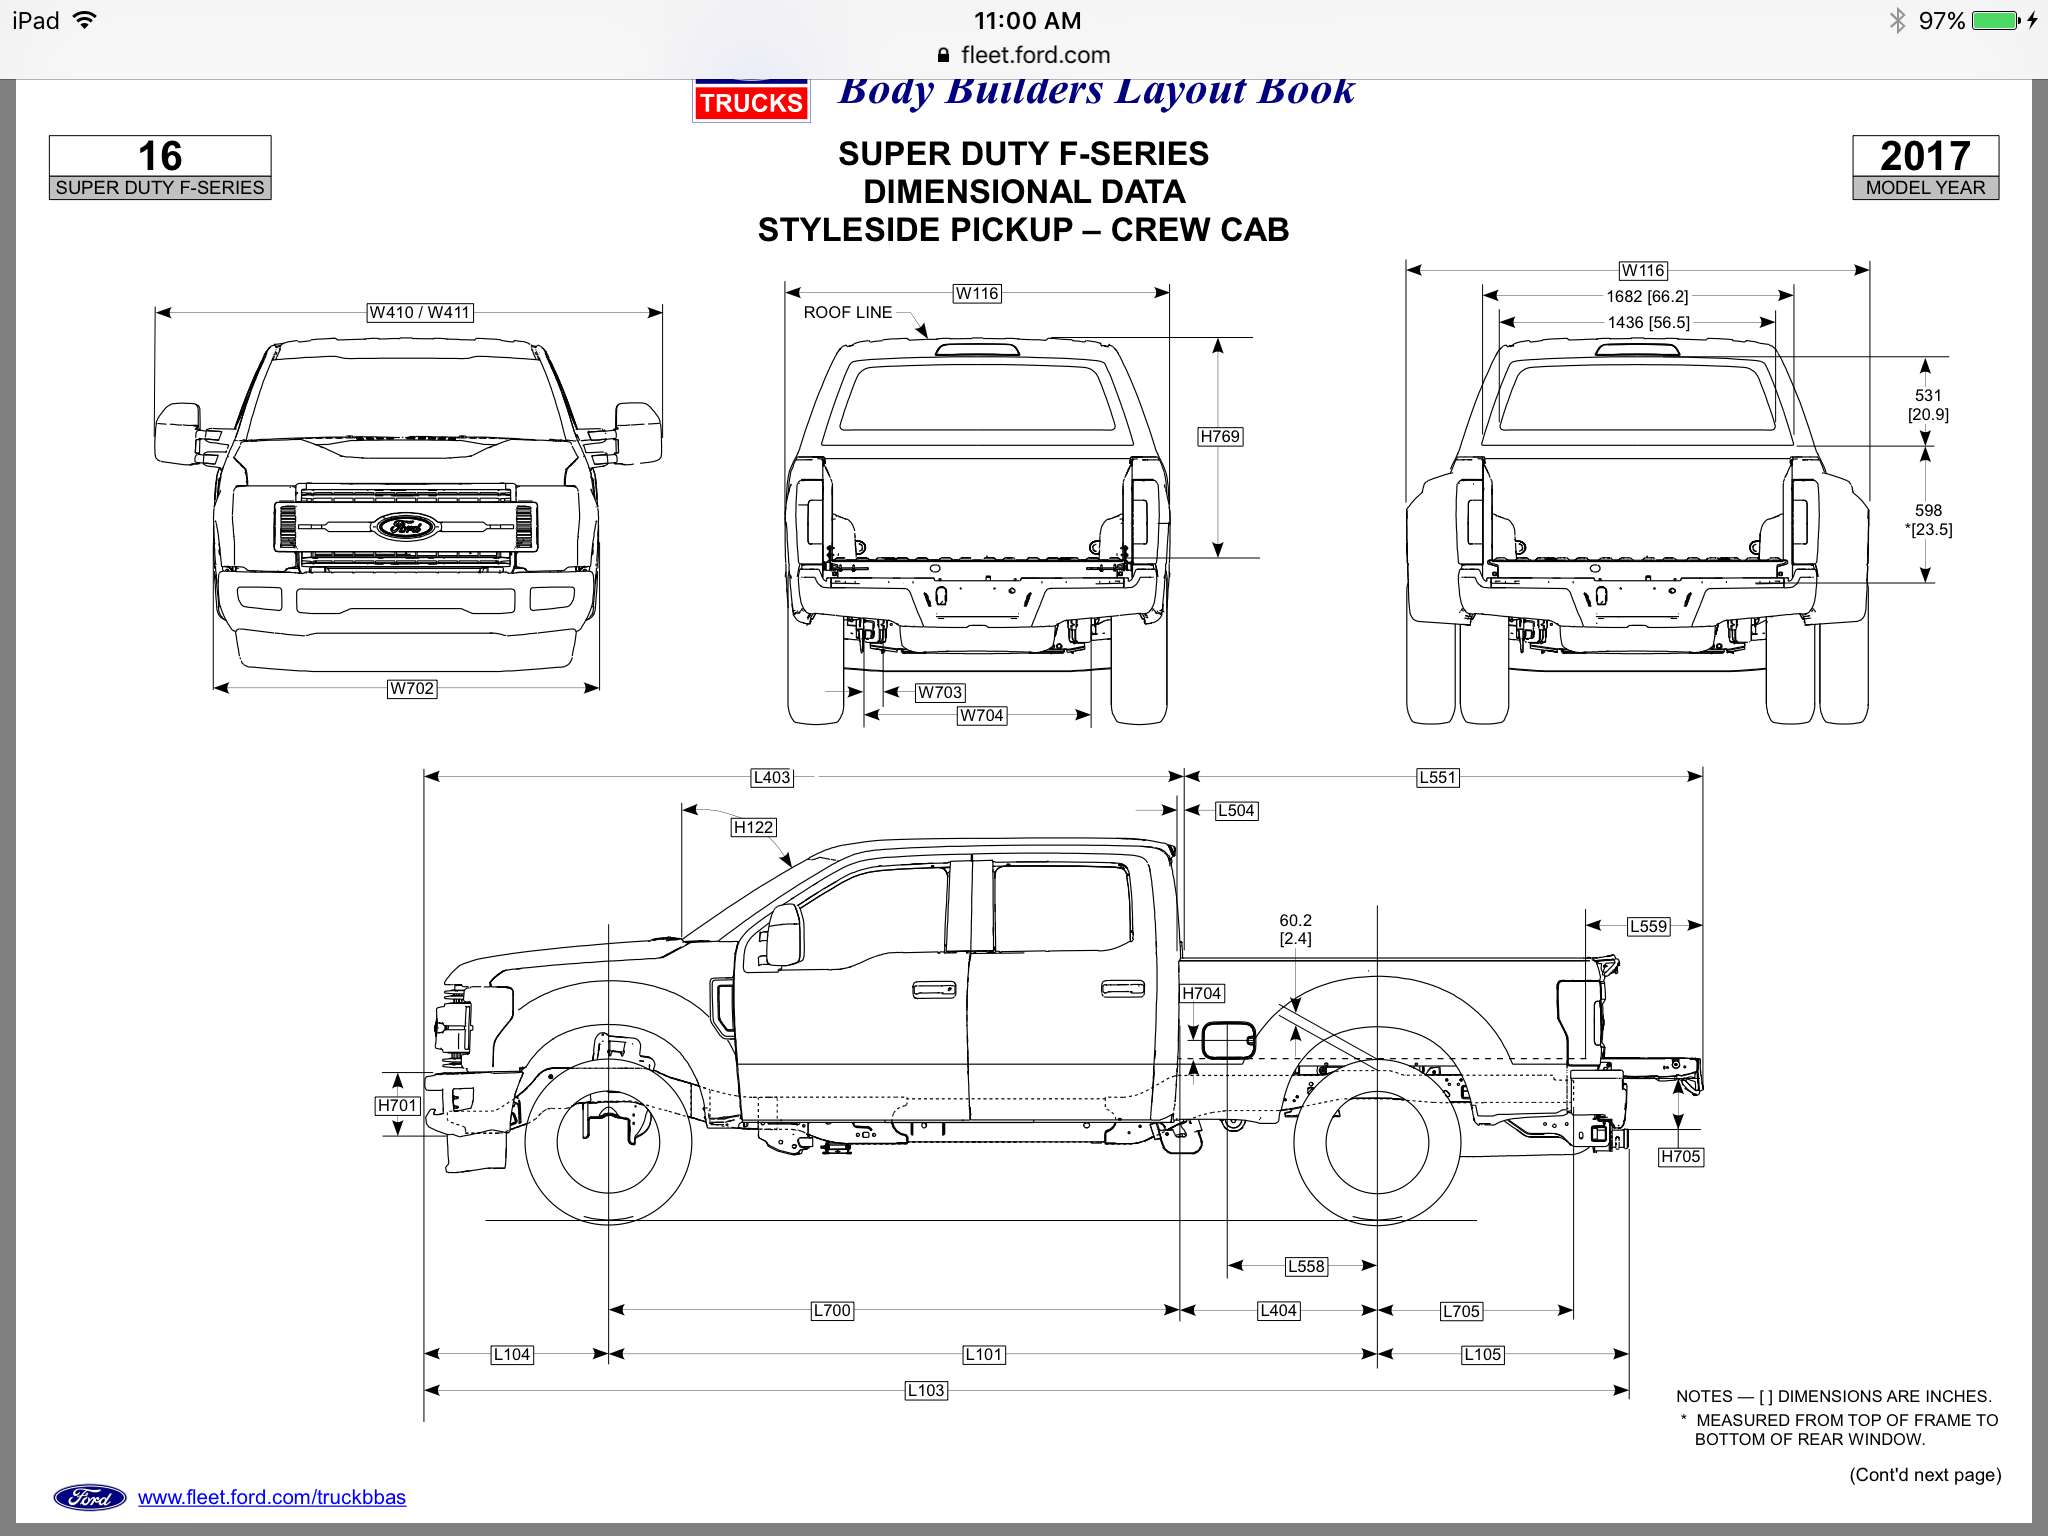 Bed length with tailgate down? - Ford Truck Enthusiasts Forums